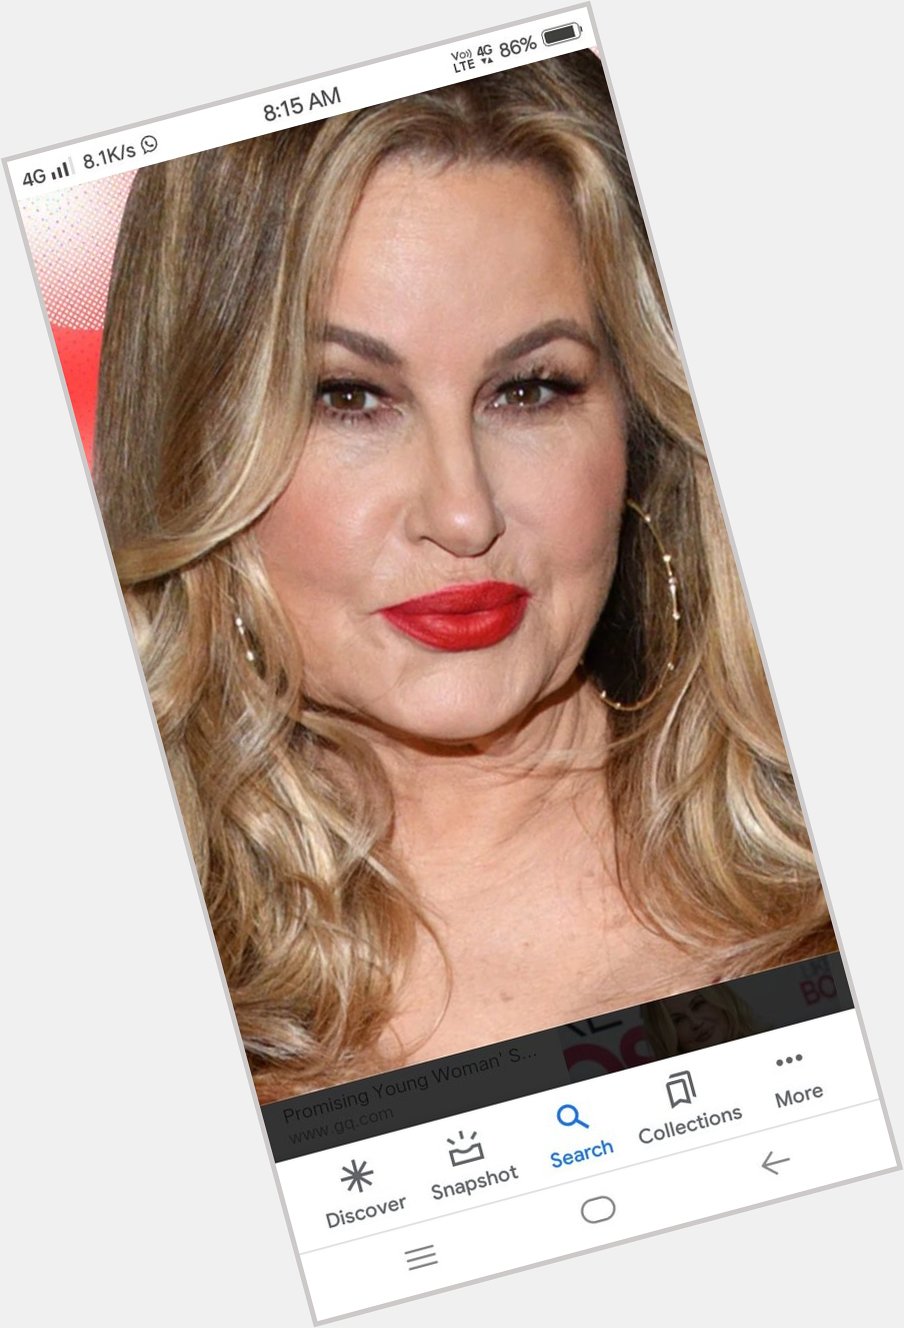 Happy birthday (Jennifer Coolidge)

We all love you 
You are the best 